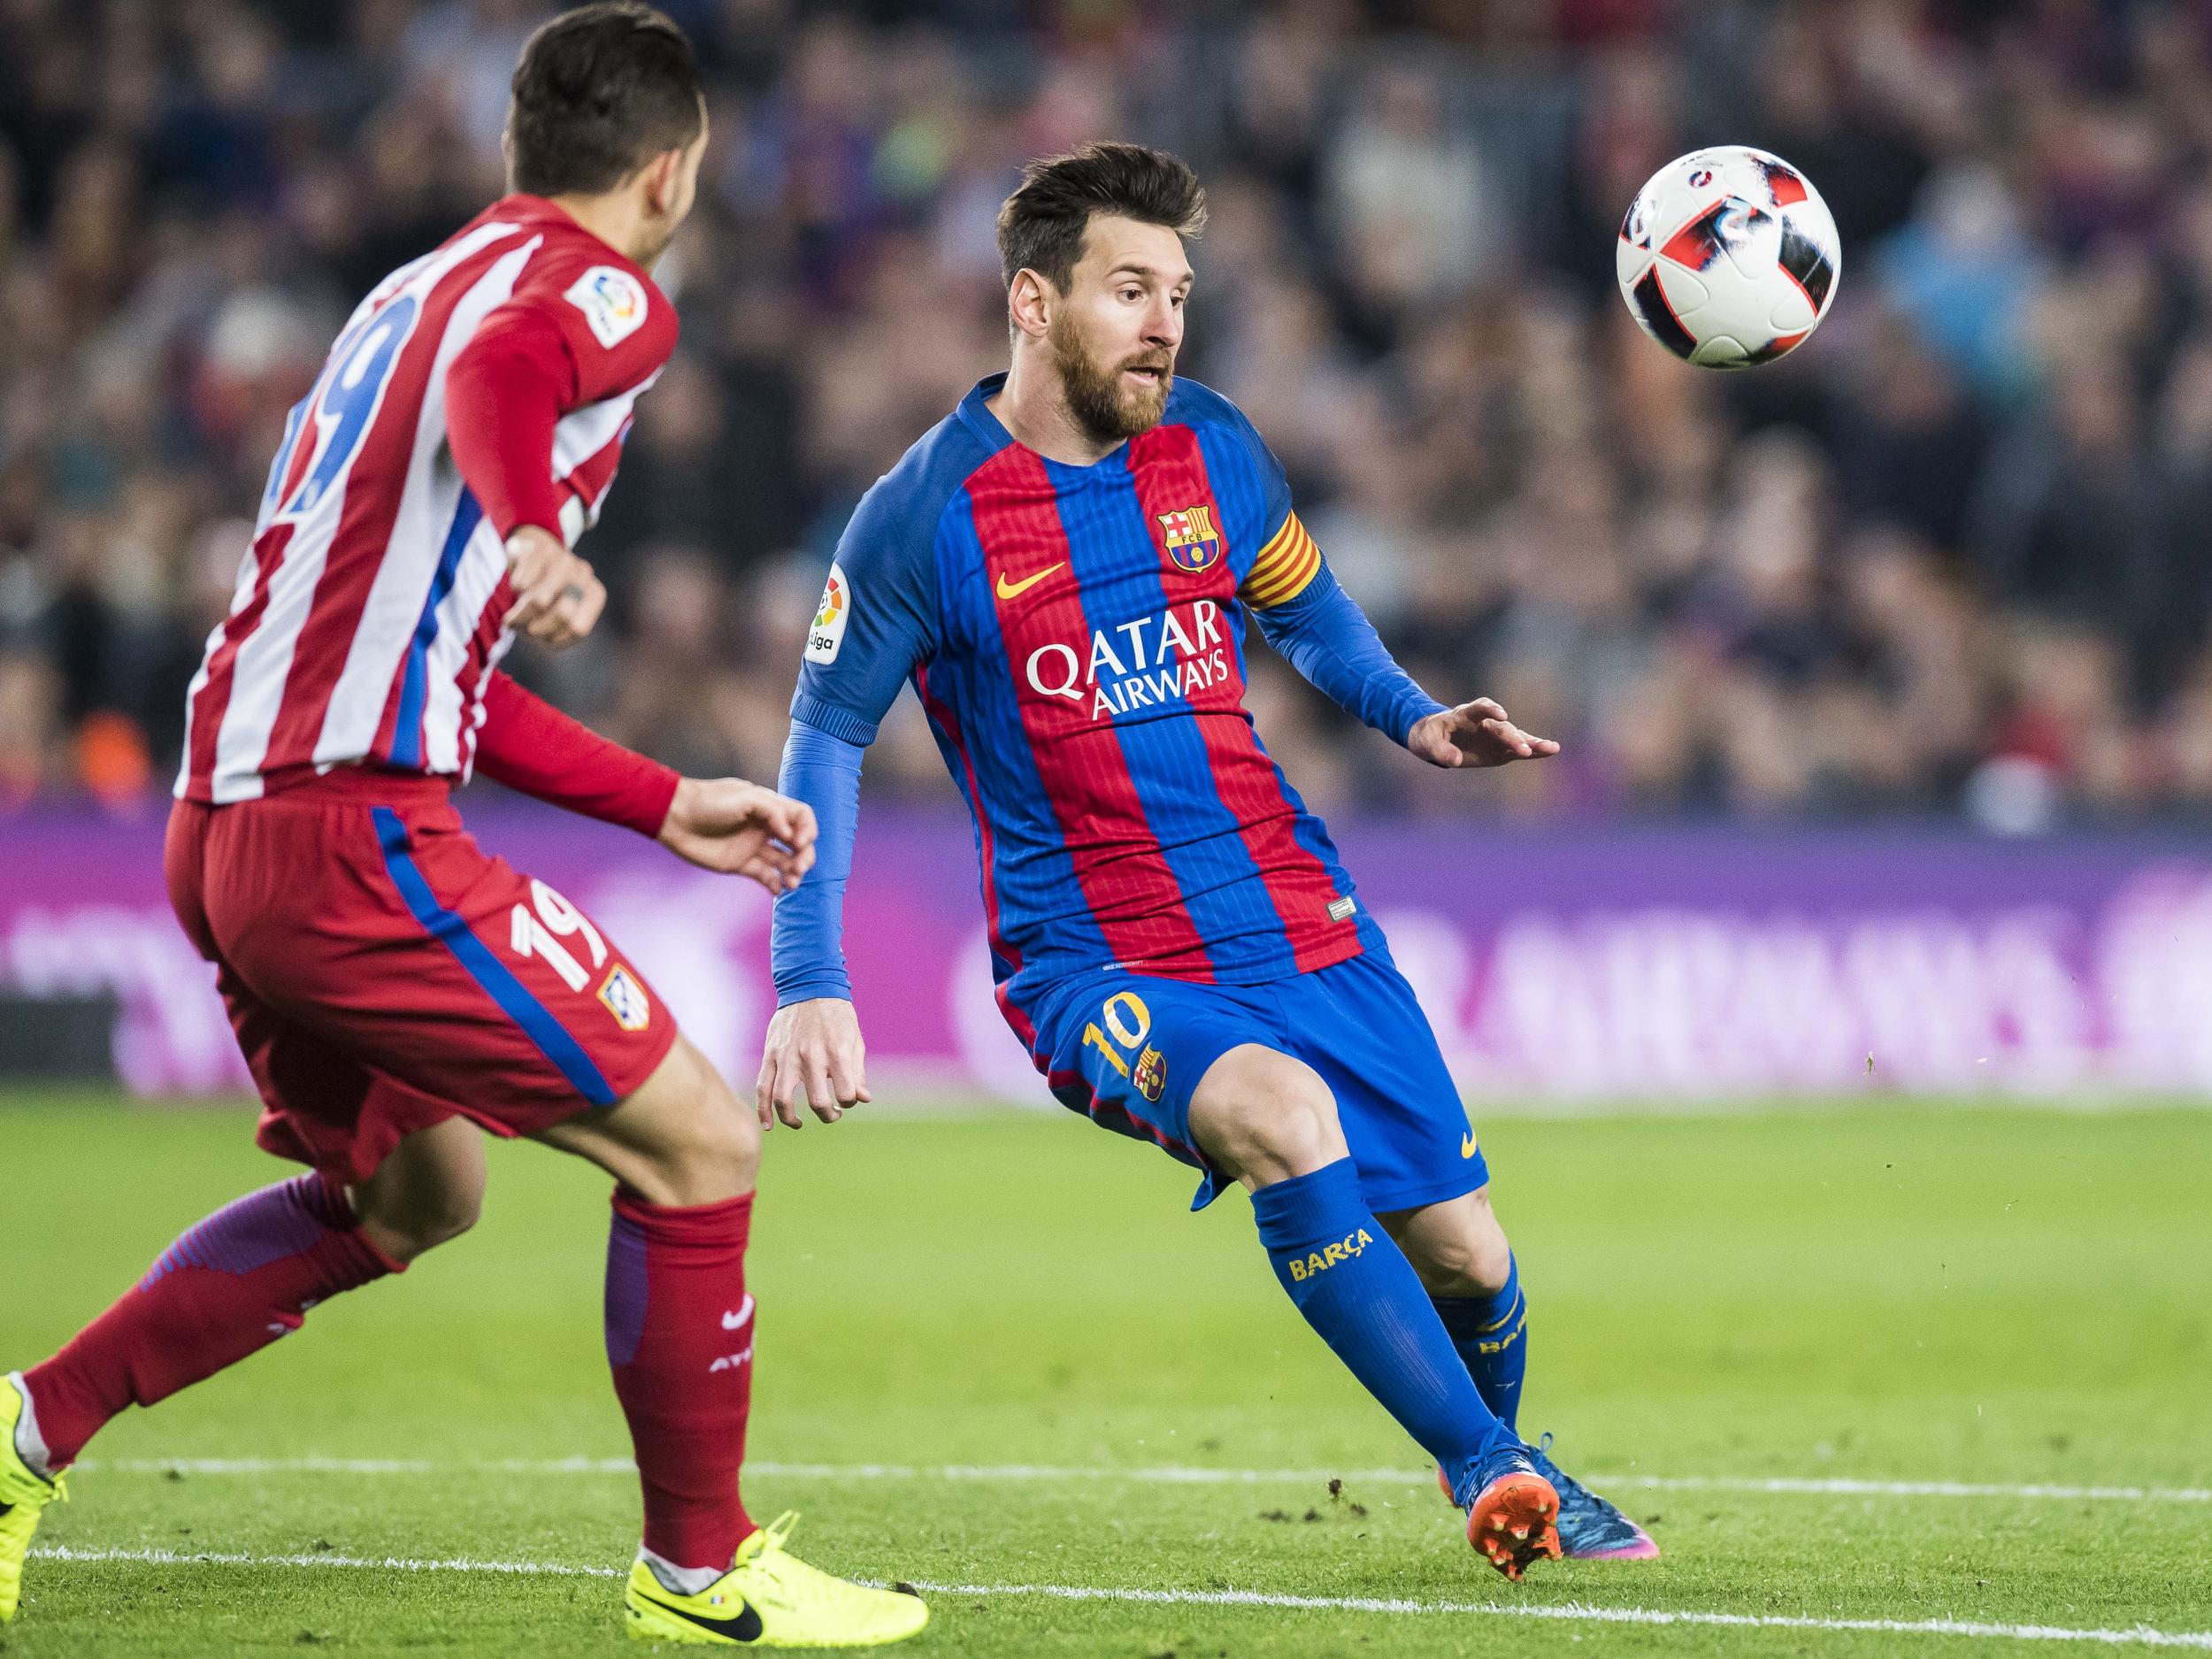 All eyes will be on Messi as Atletico host Barcelona